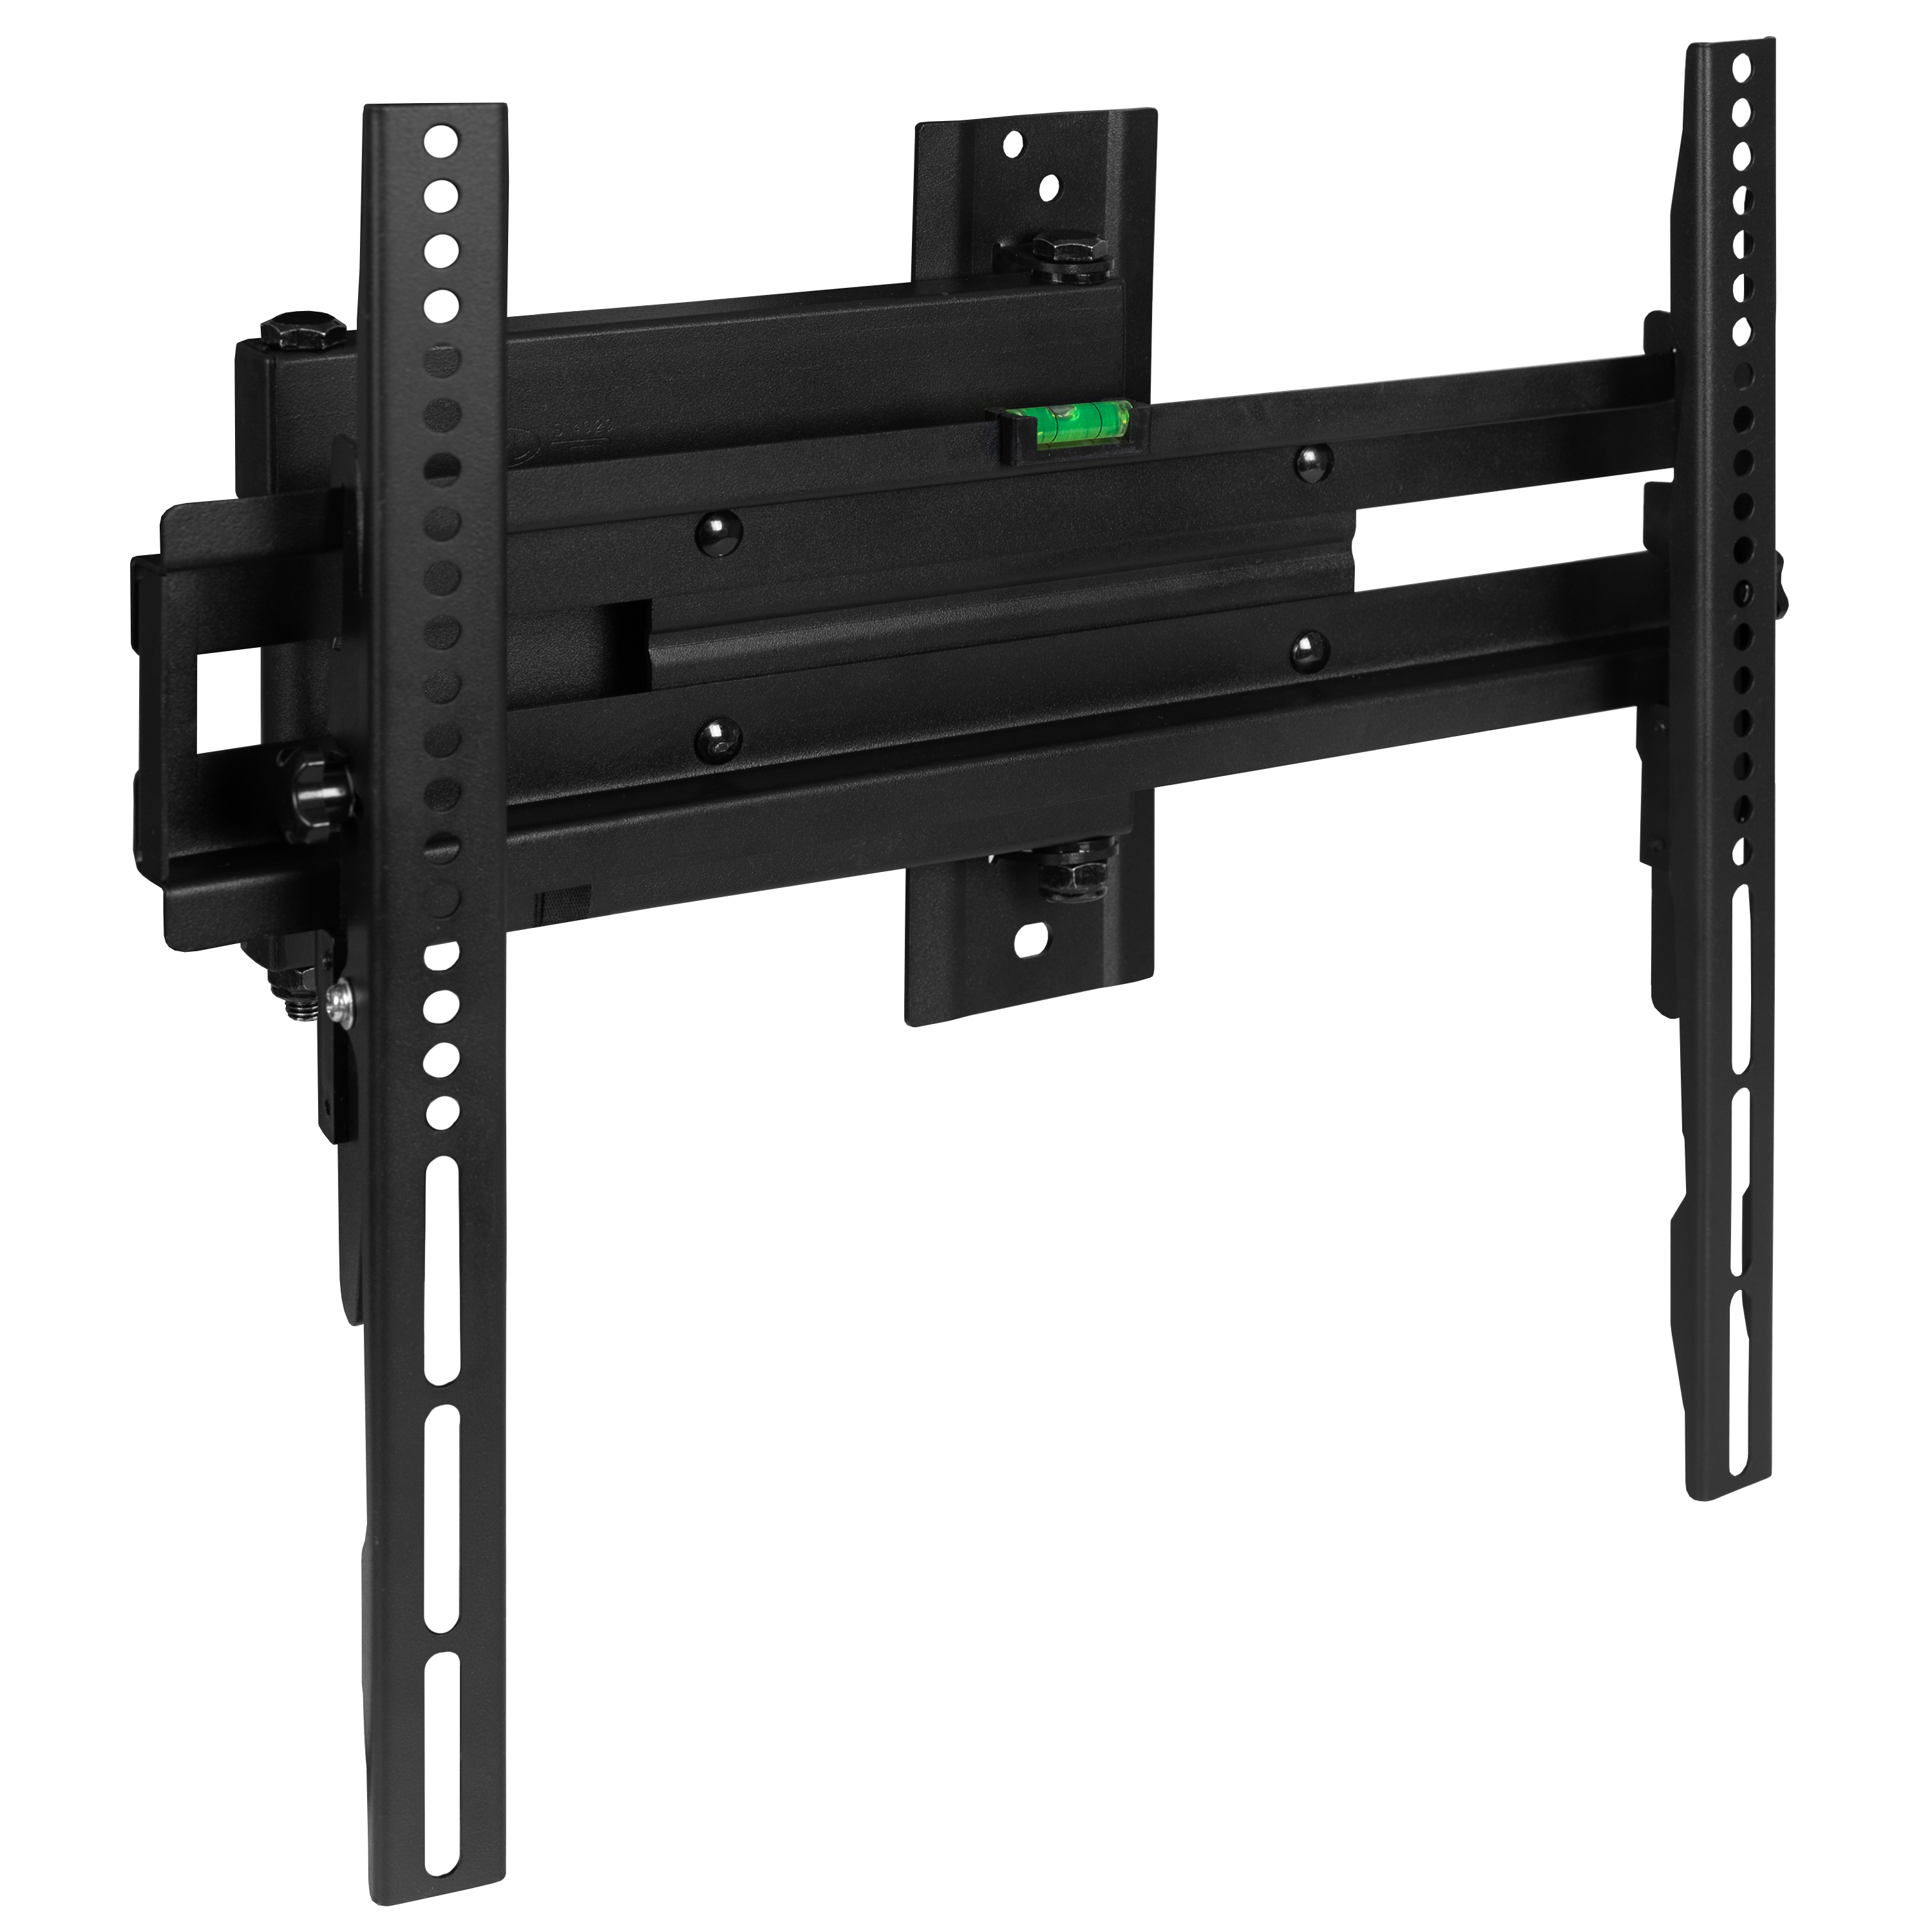 Flash Furniture RA-MP005-GG Full Motion TV Wall Mount - Built-In Level - Fits most TV's 32" - 55"